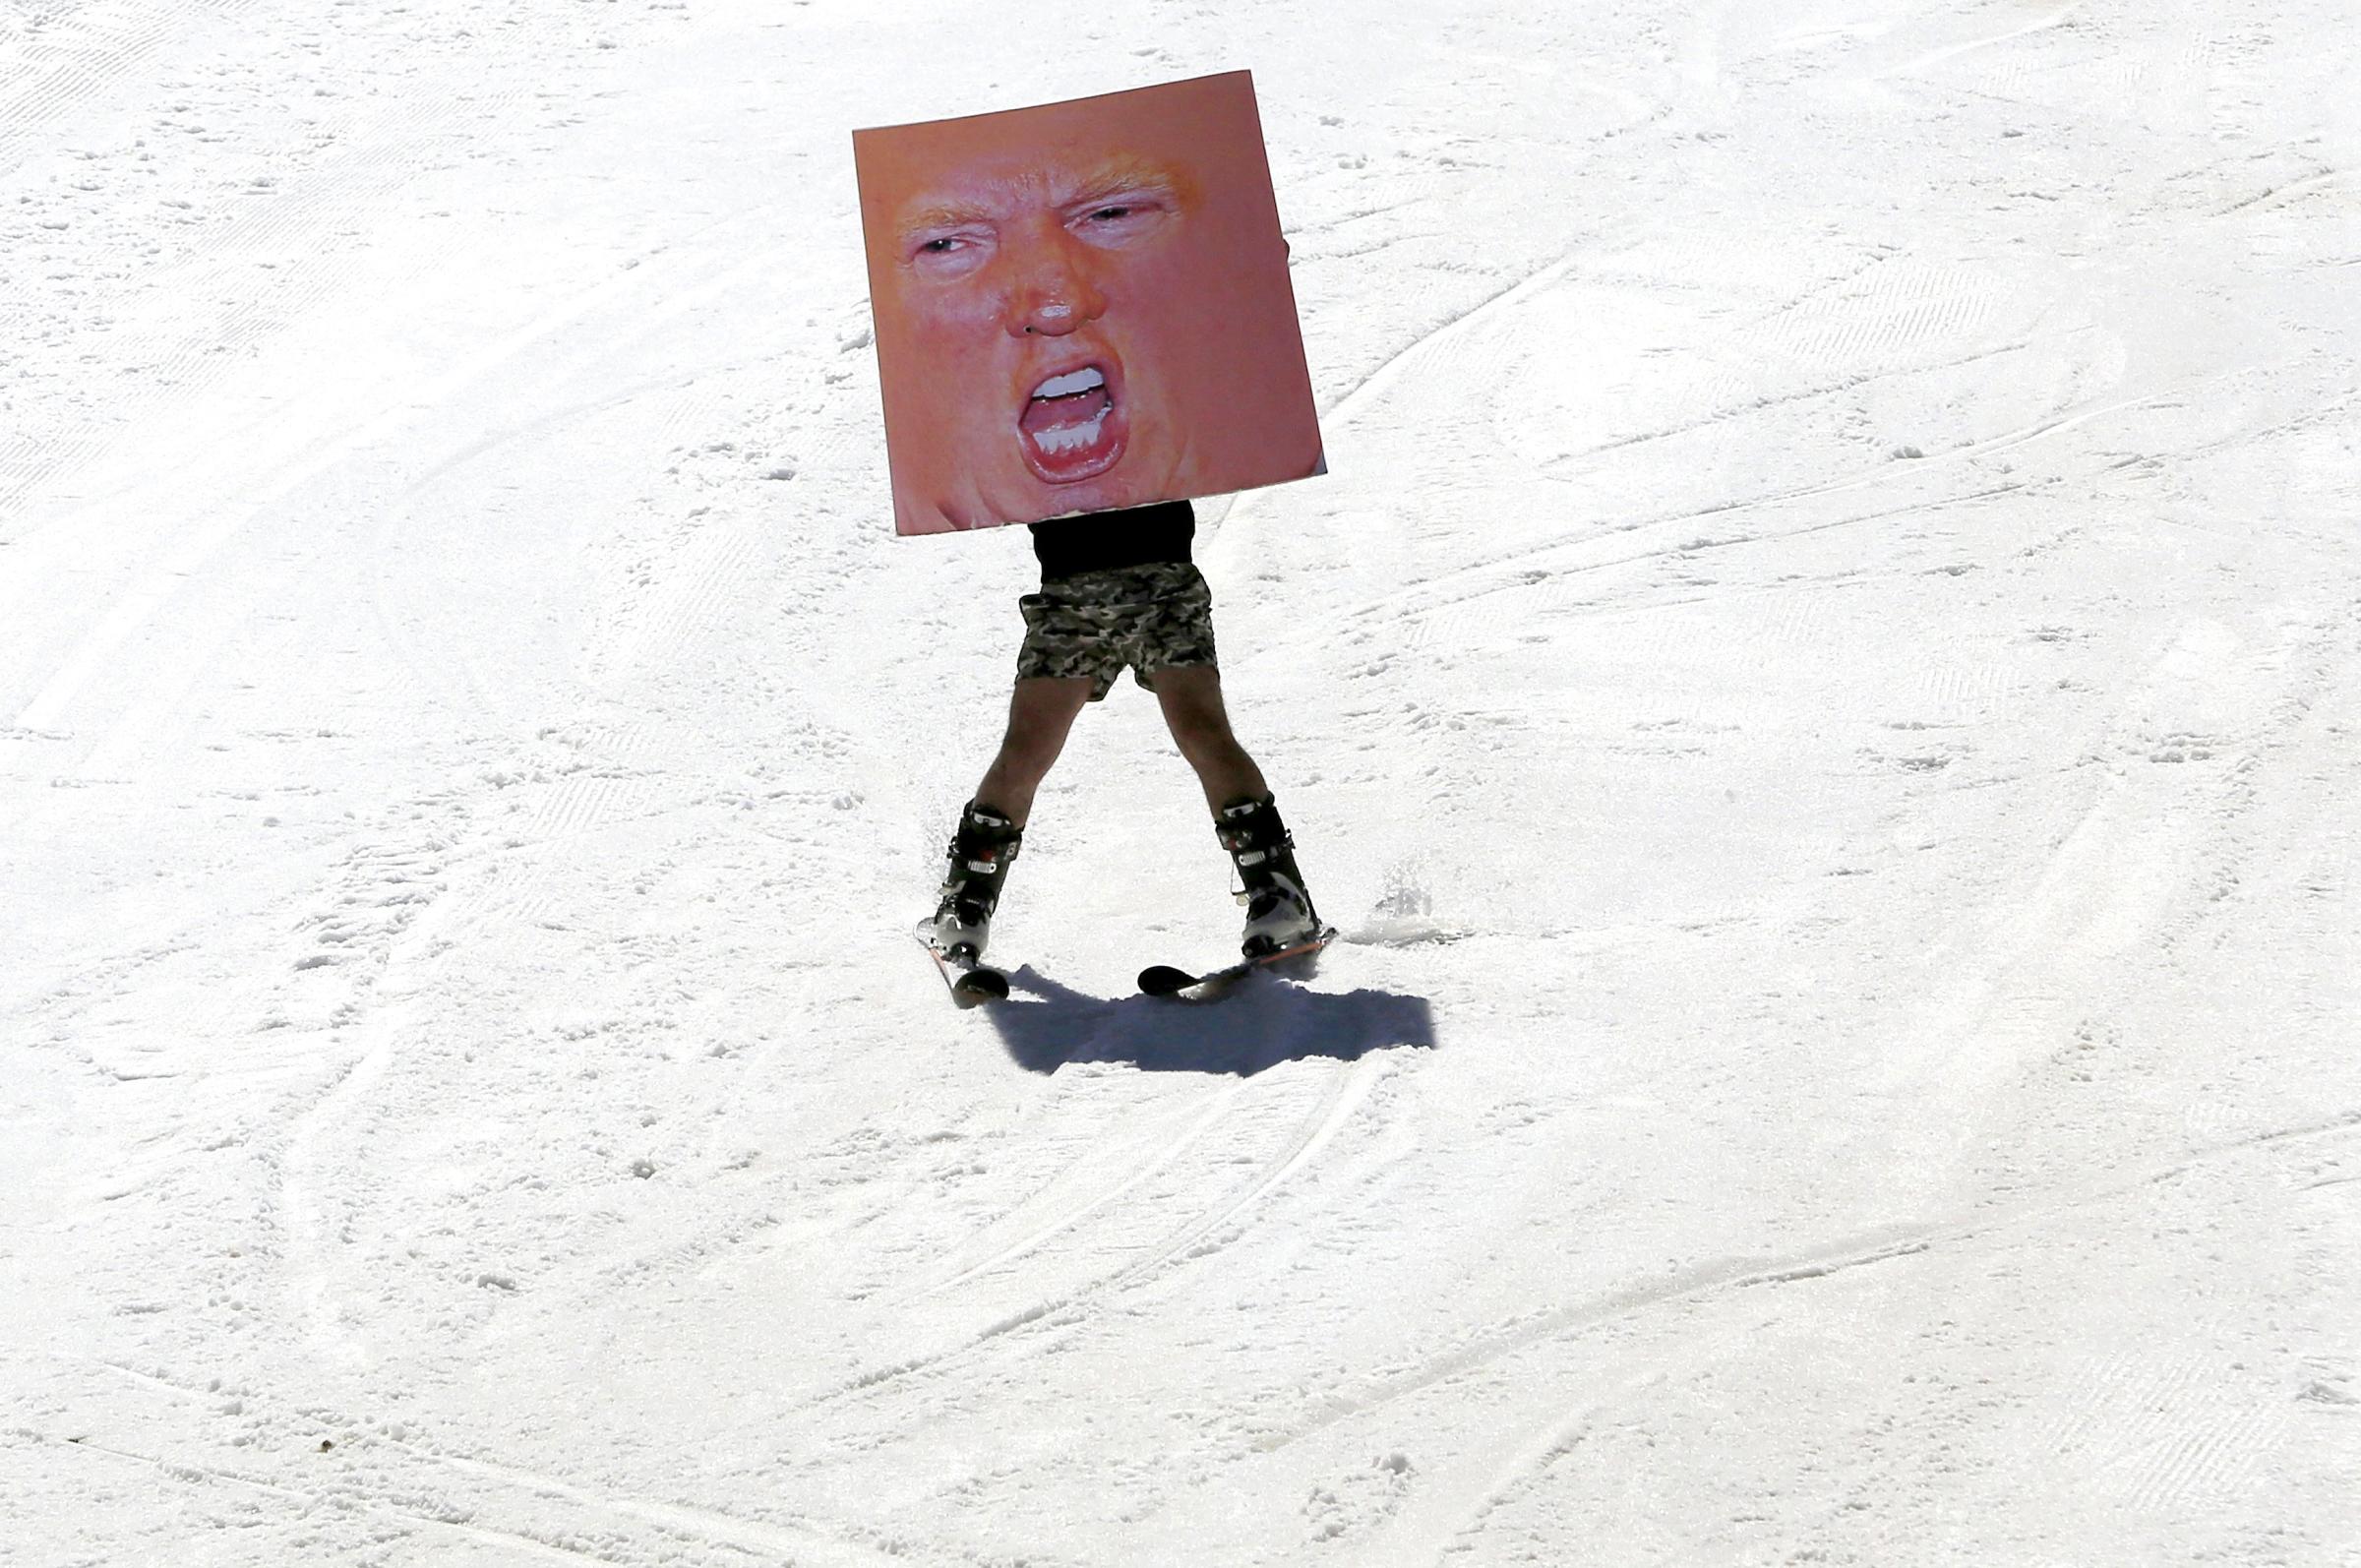 A man holds a poster depicting Donald Trump while participating in Red Bull Jump &amp; Freeze Lebanon at a ski resort in mount Lebanon on Feb. 28.